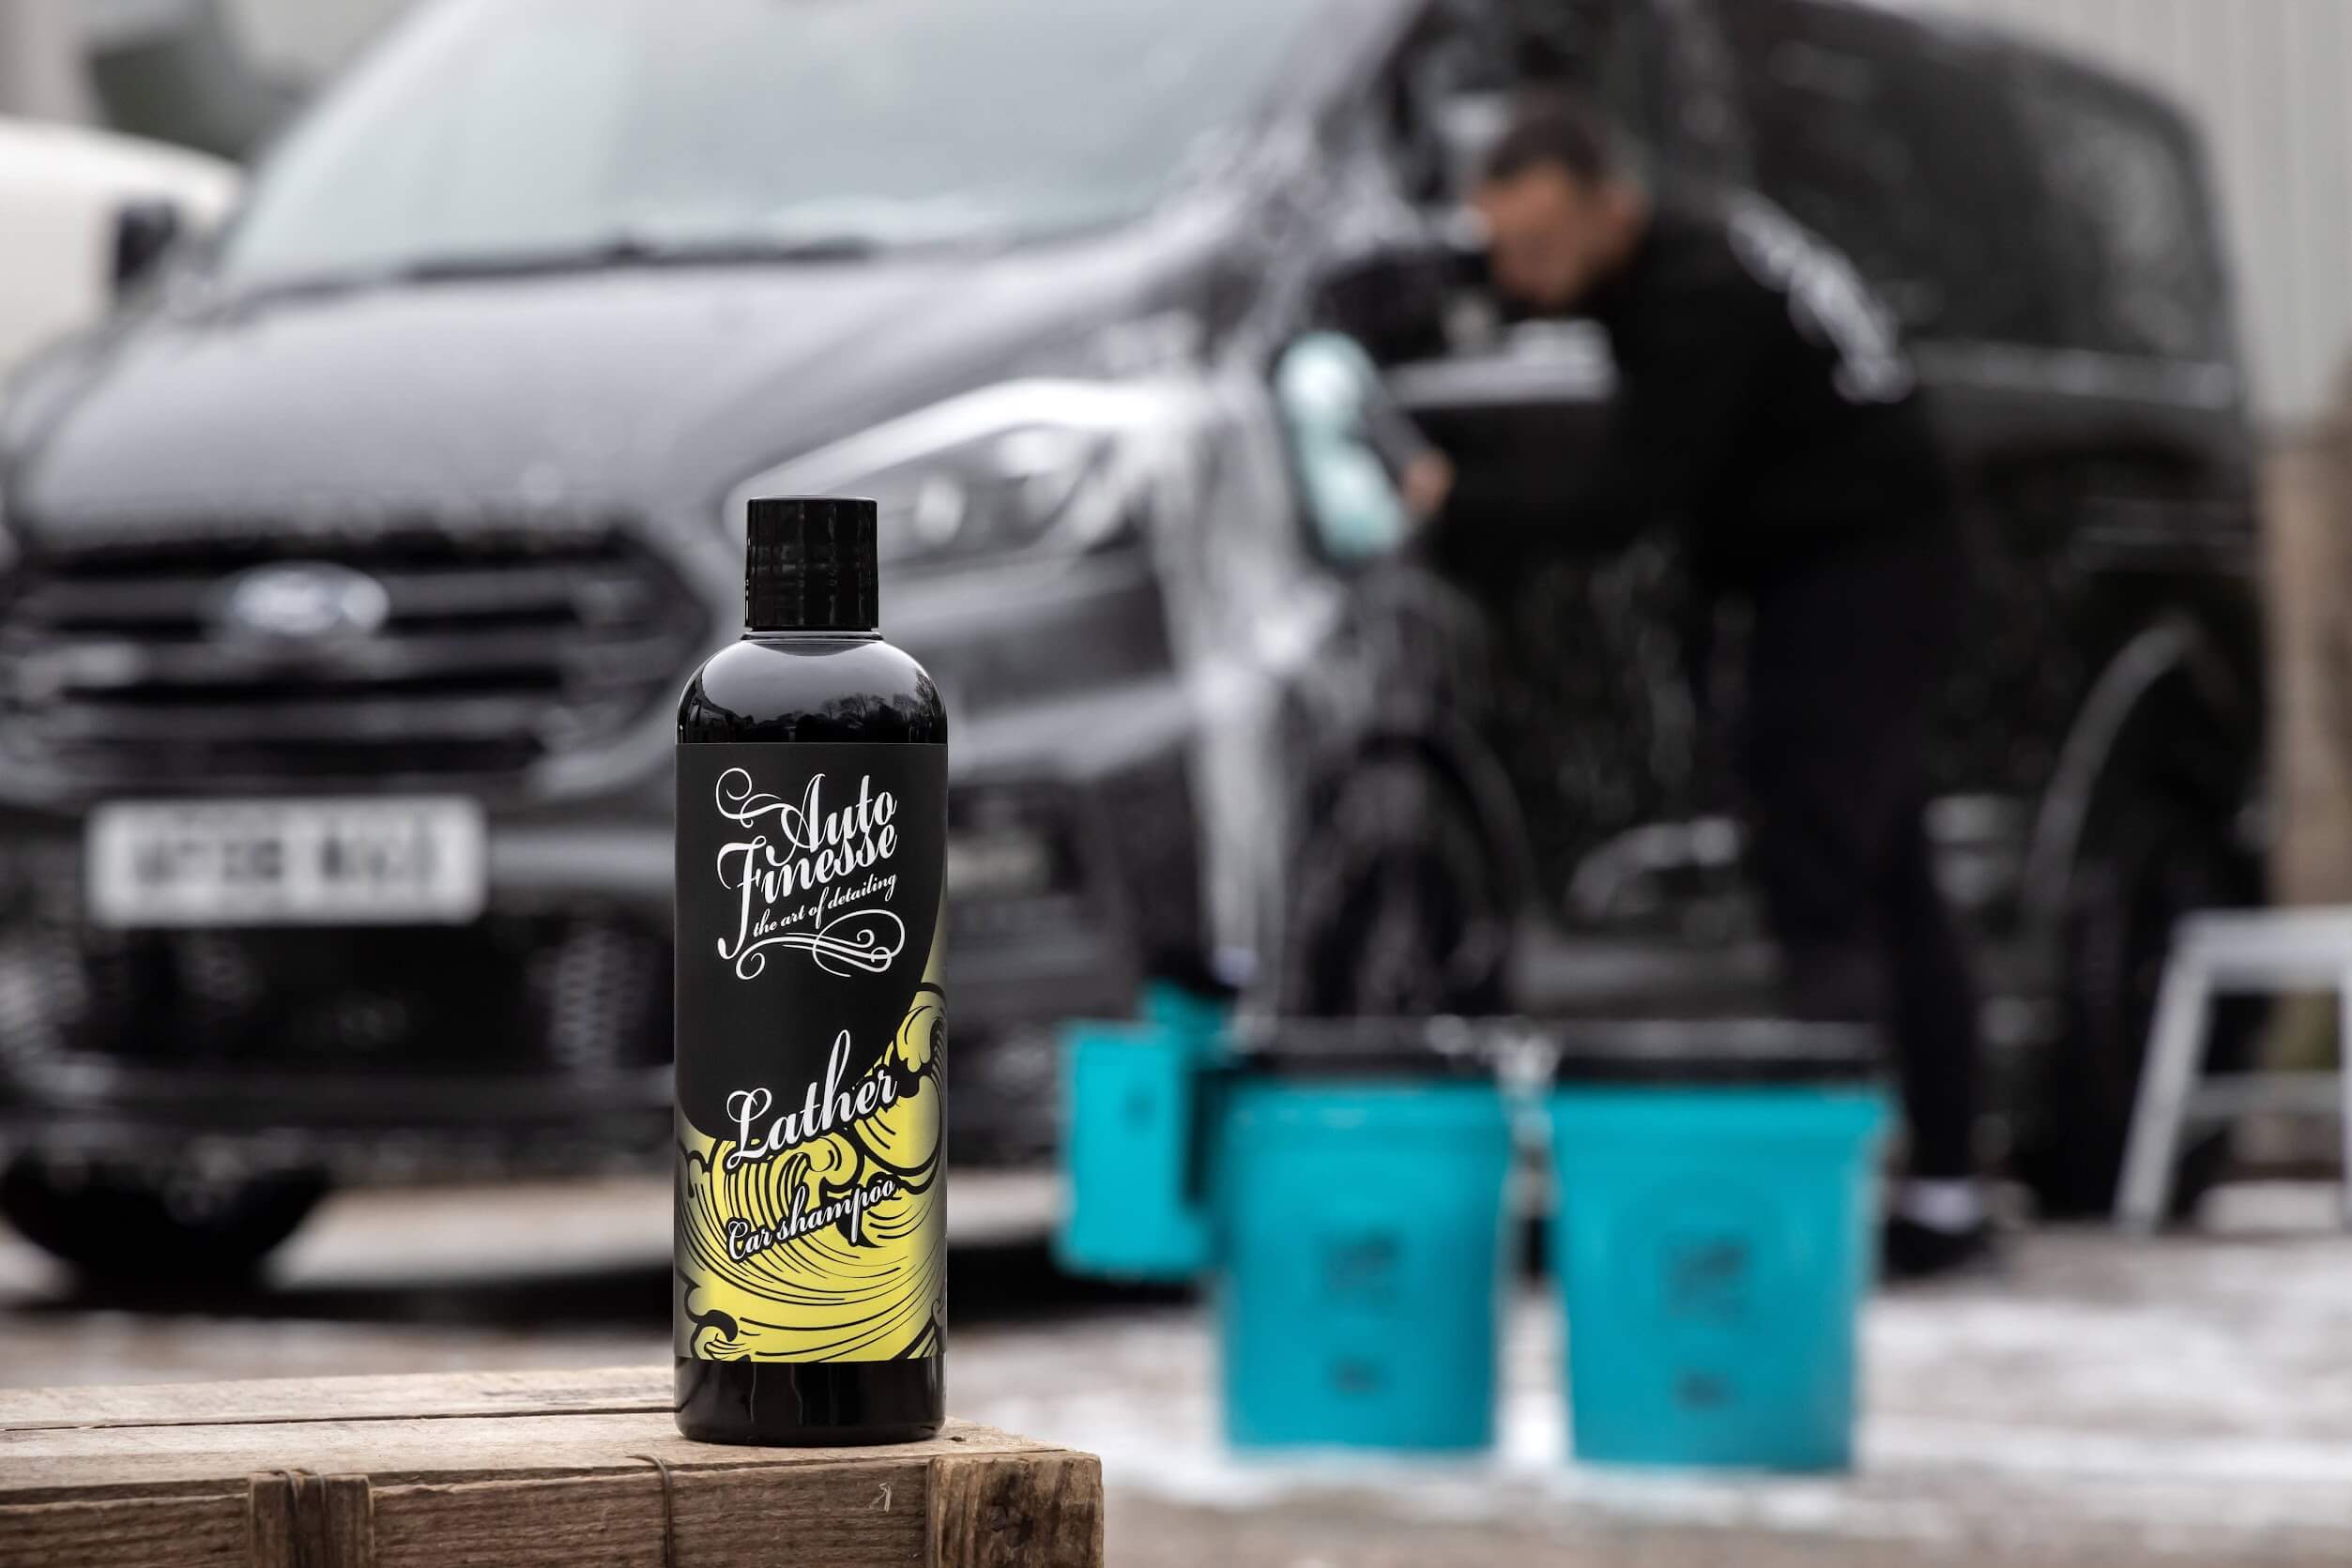 Auto Finesse | Lather ph Neutral Car Shampoo - The Ultimate Swirl Free Wash